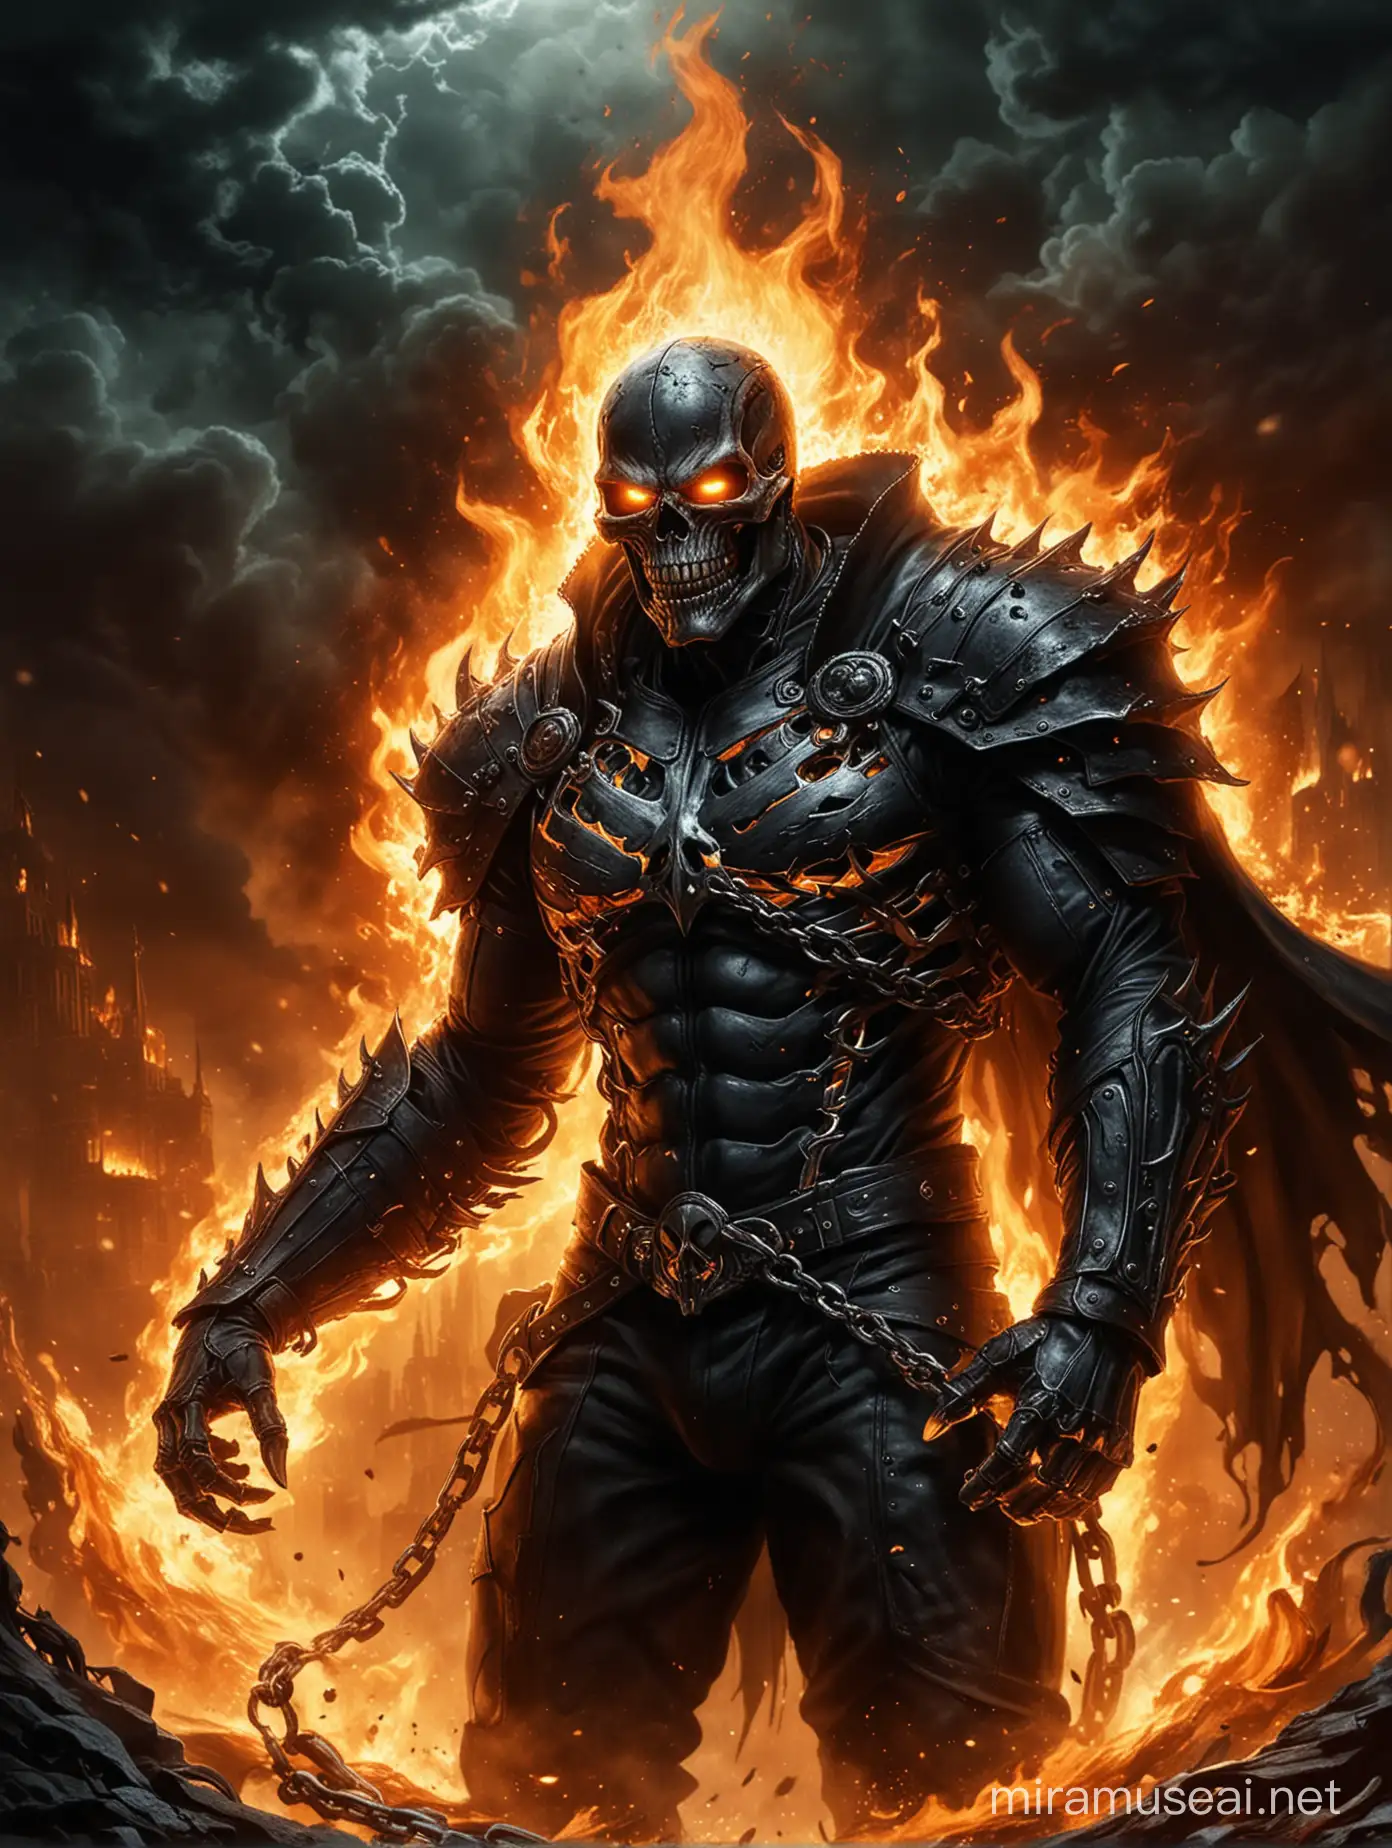 In the fiery depths of Hell, amidst the swirling chaos, Ghost Rider sits upon his throne, his form cloaked in flames. With an iron grip, he wields his chain, unleashing divine justice upon the demons who dare to defy him, their agonized cries echoing through the infernal realm. As the flames dance around him, his eyes burn with righteous fury, a beacon of hope amidst the darkness of the abyss.